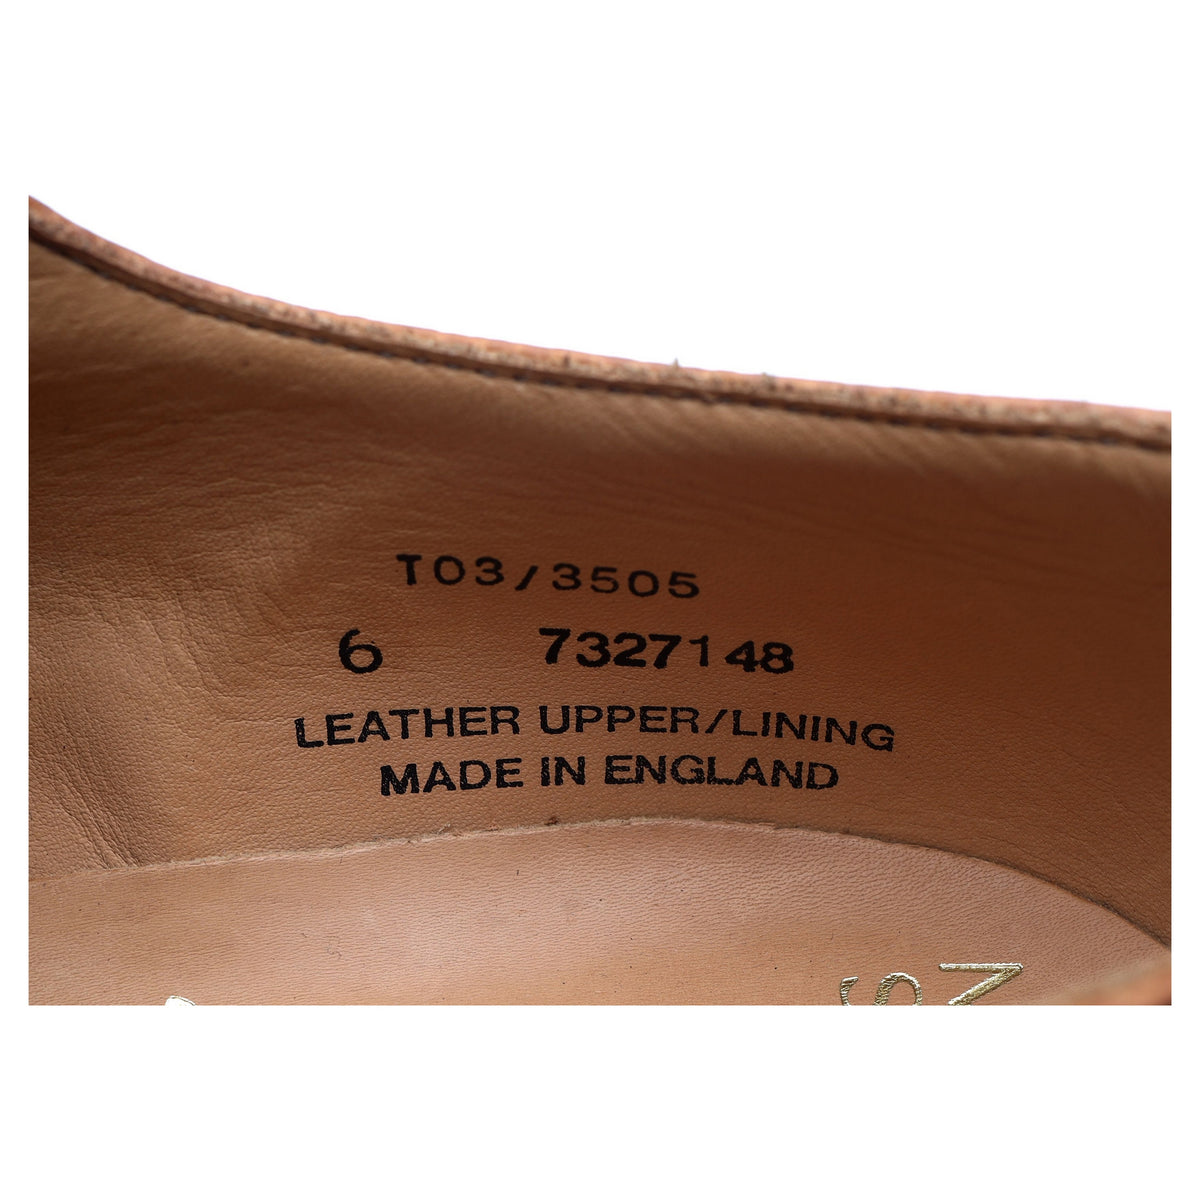 Tan Brown Leather Derby UK 6 F